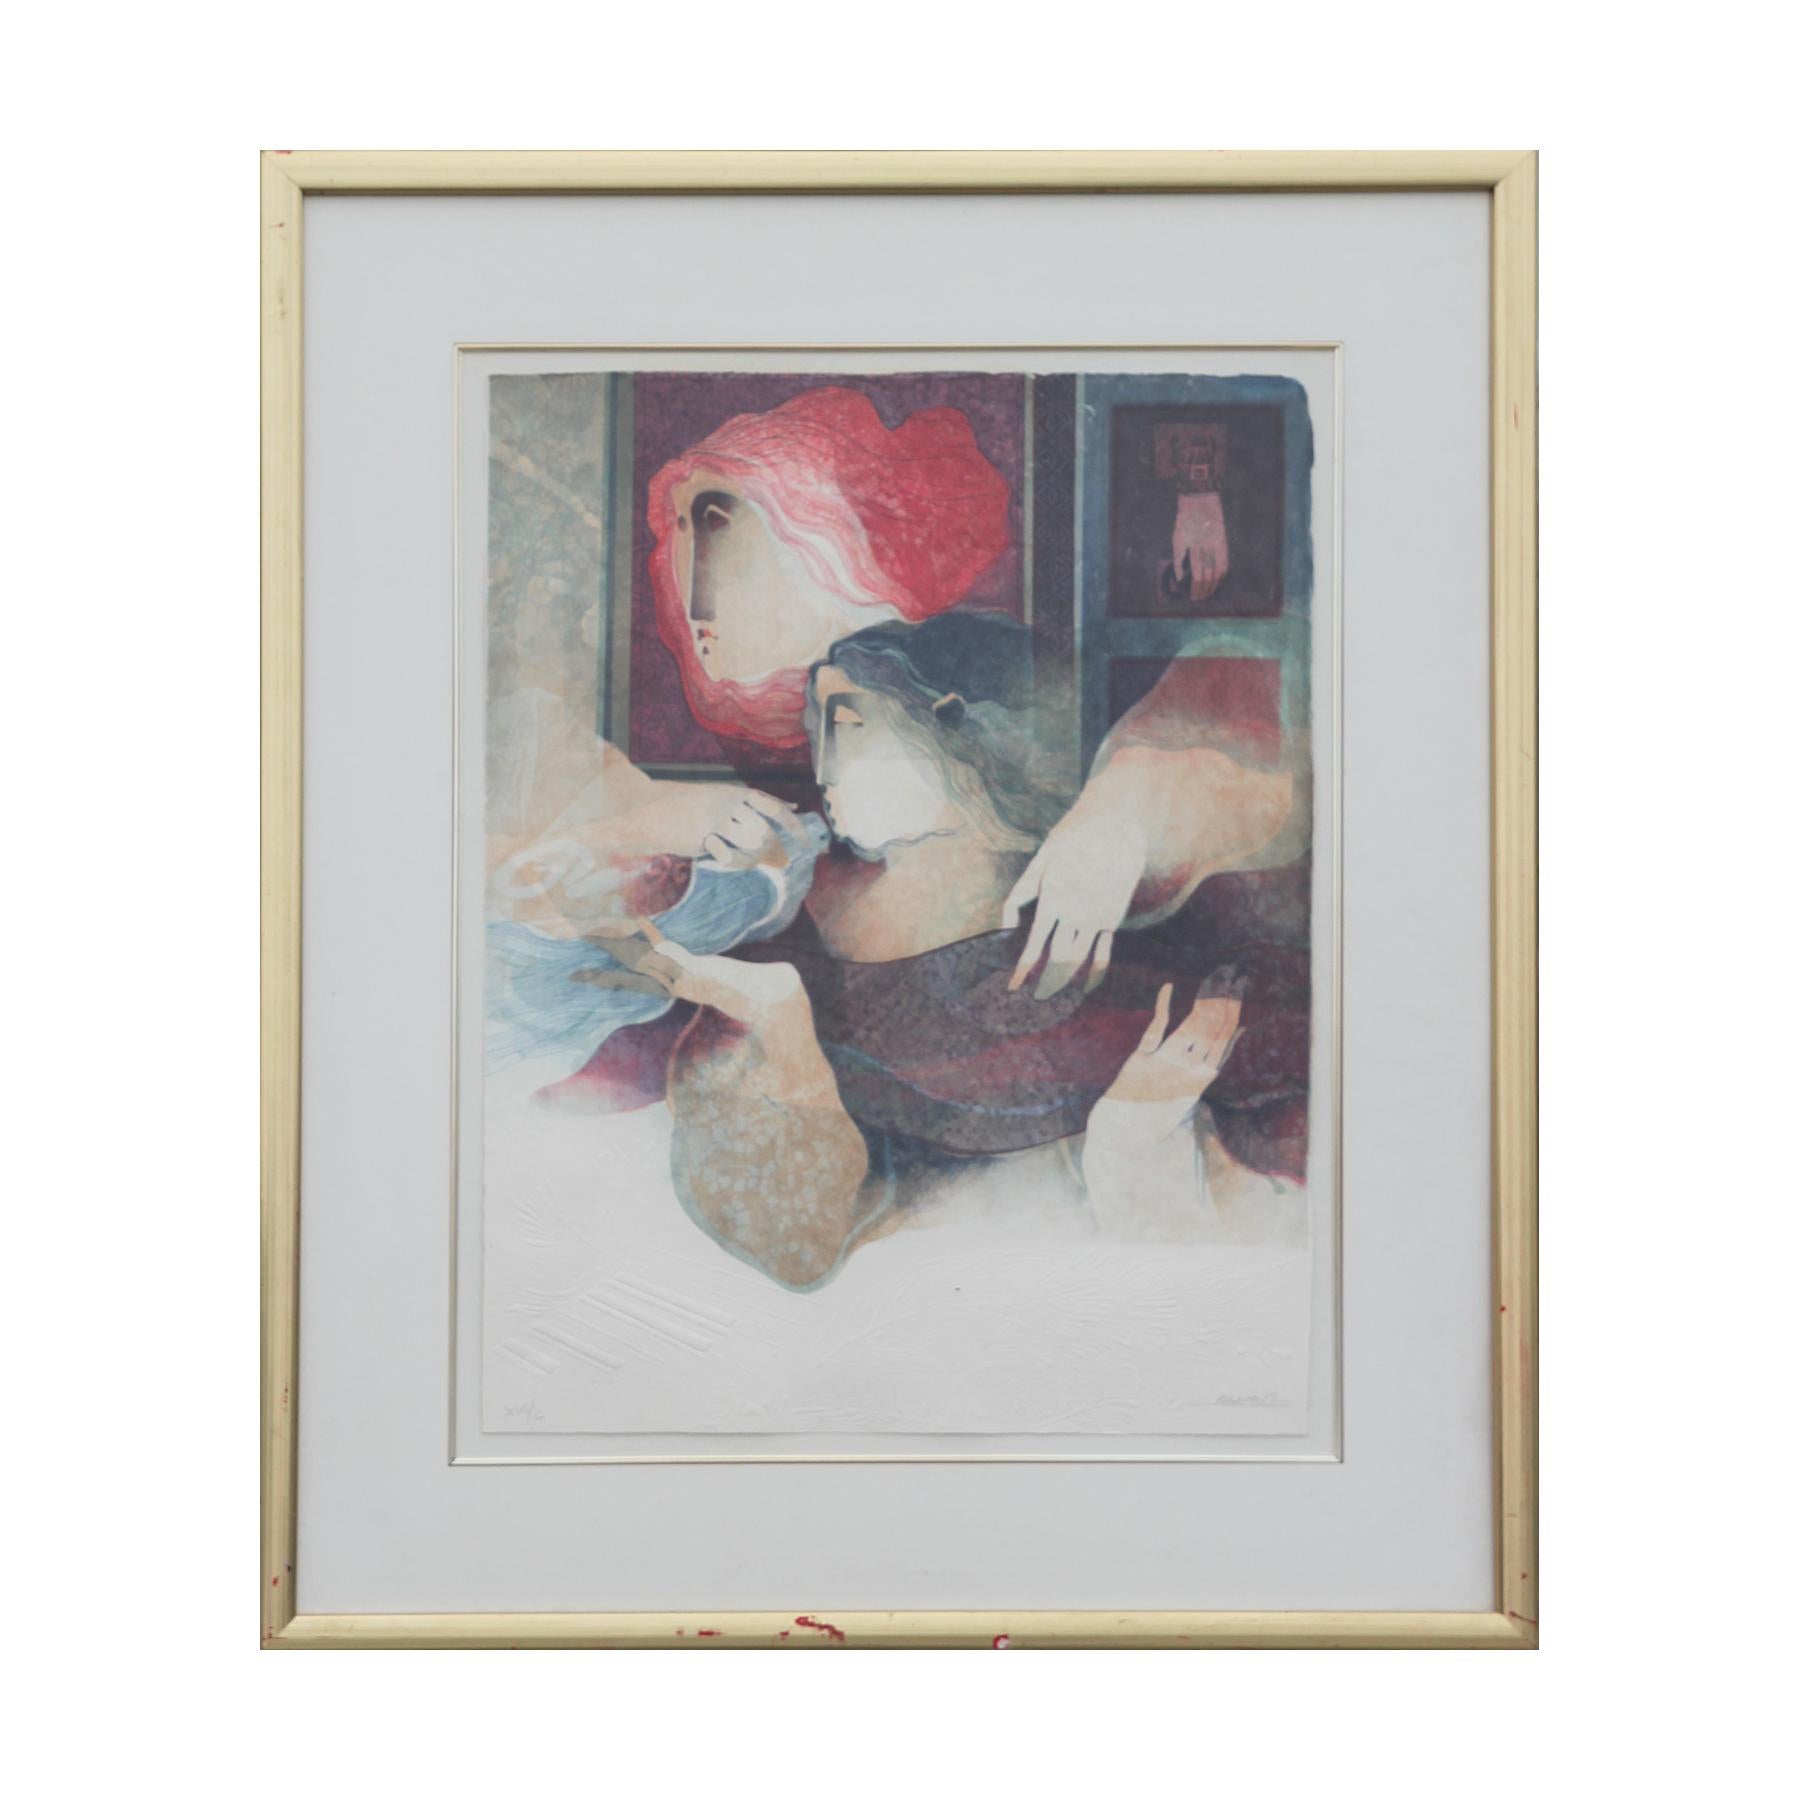 Alvar Sunol Munoz-Ramos Abstract Print - Red Toned Abstract Portrait of Two Female Figures with Bird Lithograph